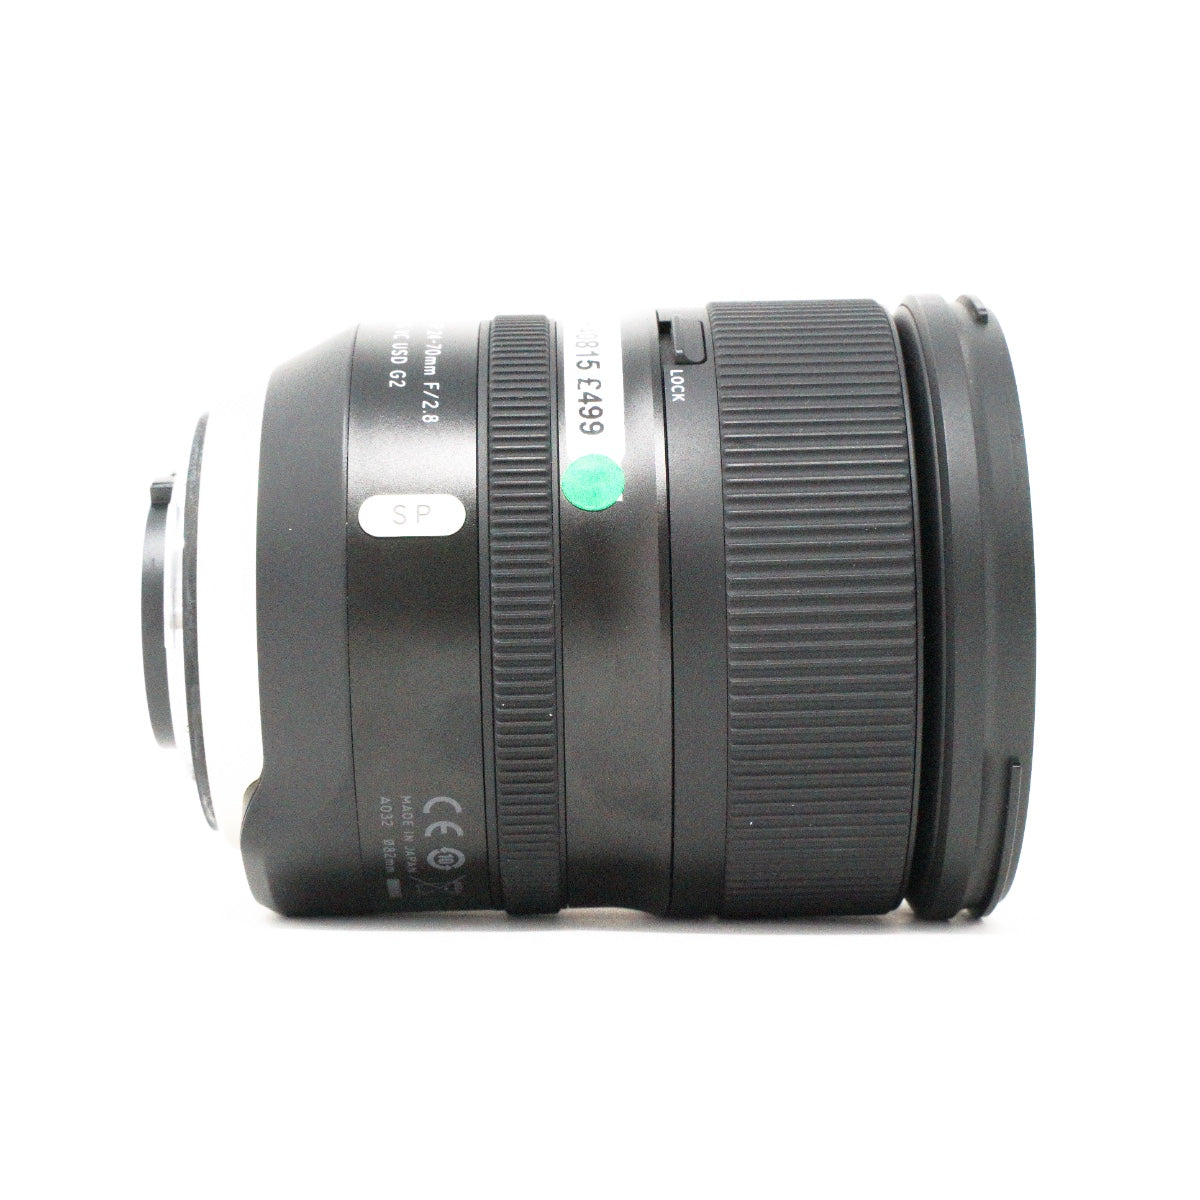 Used Tamron SP 24-70mm F/2.8 Di USD G2 lens for Nikon